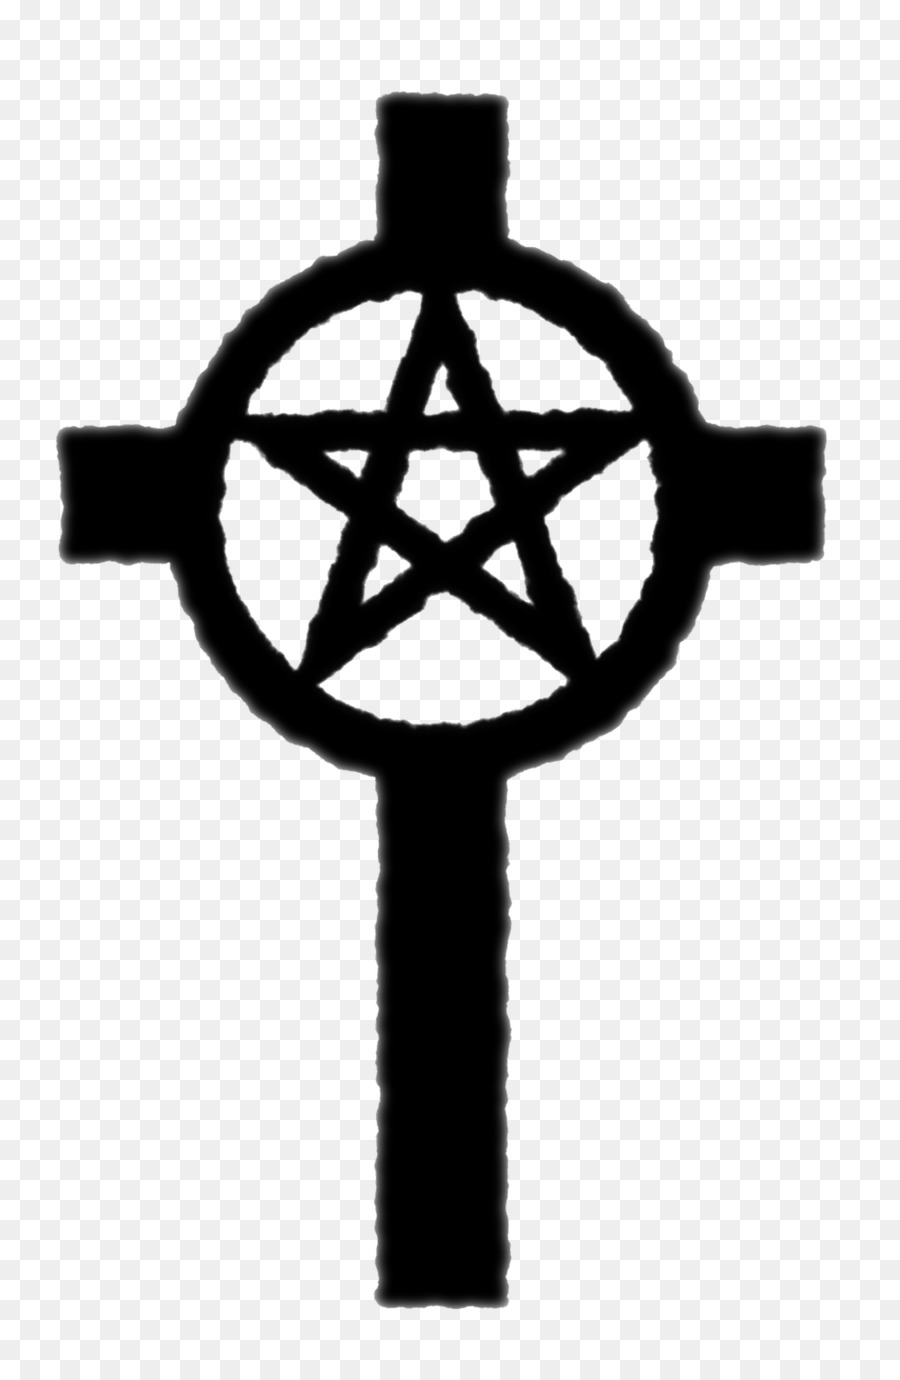 Wicca Pentacle Christianity and Neopaganism Christian cross Symbol - catholic png download - 1053*1600 - Free Transparent Wicca png Download.